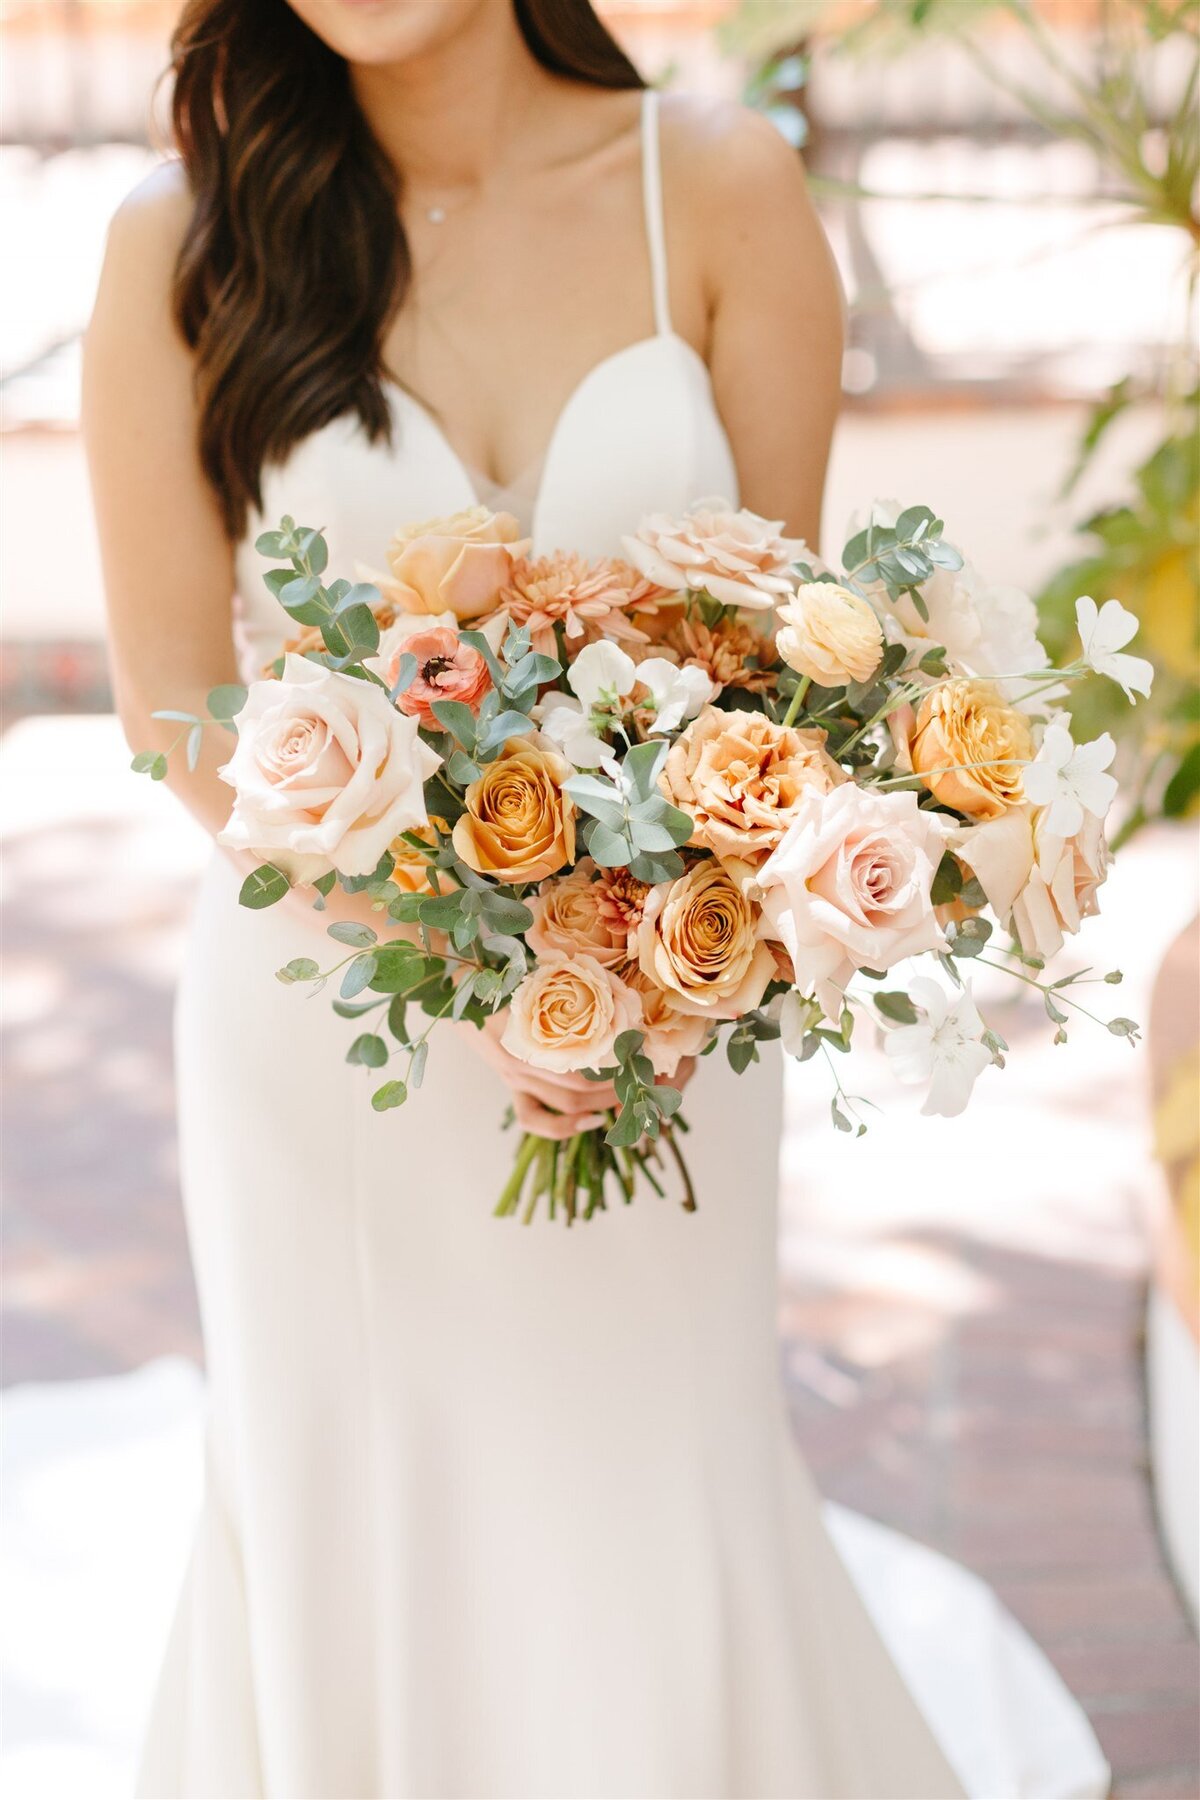 Bride holding a lush bouquet with peach and blush flowers